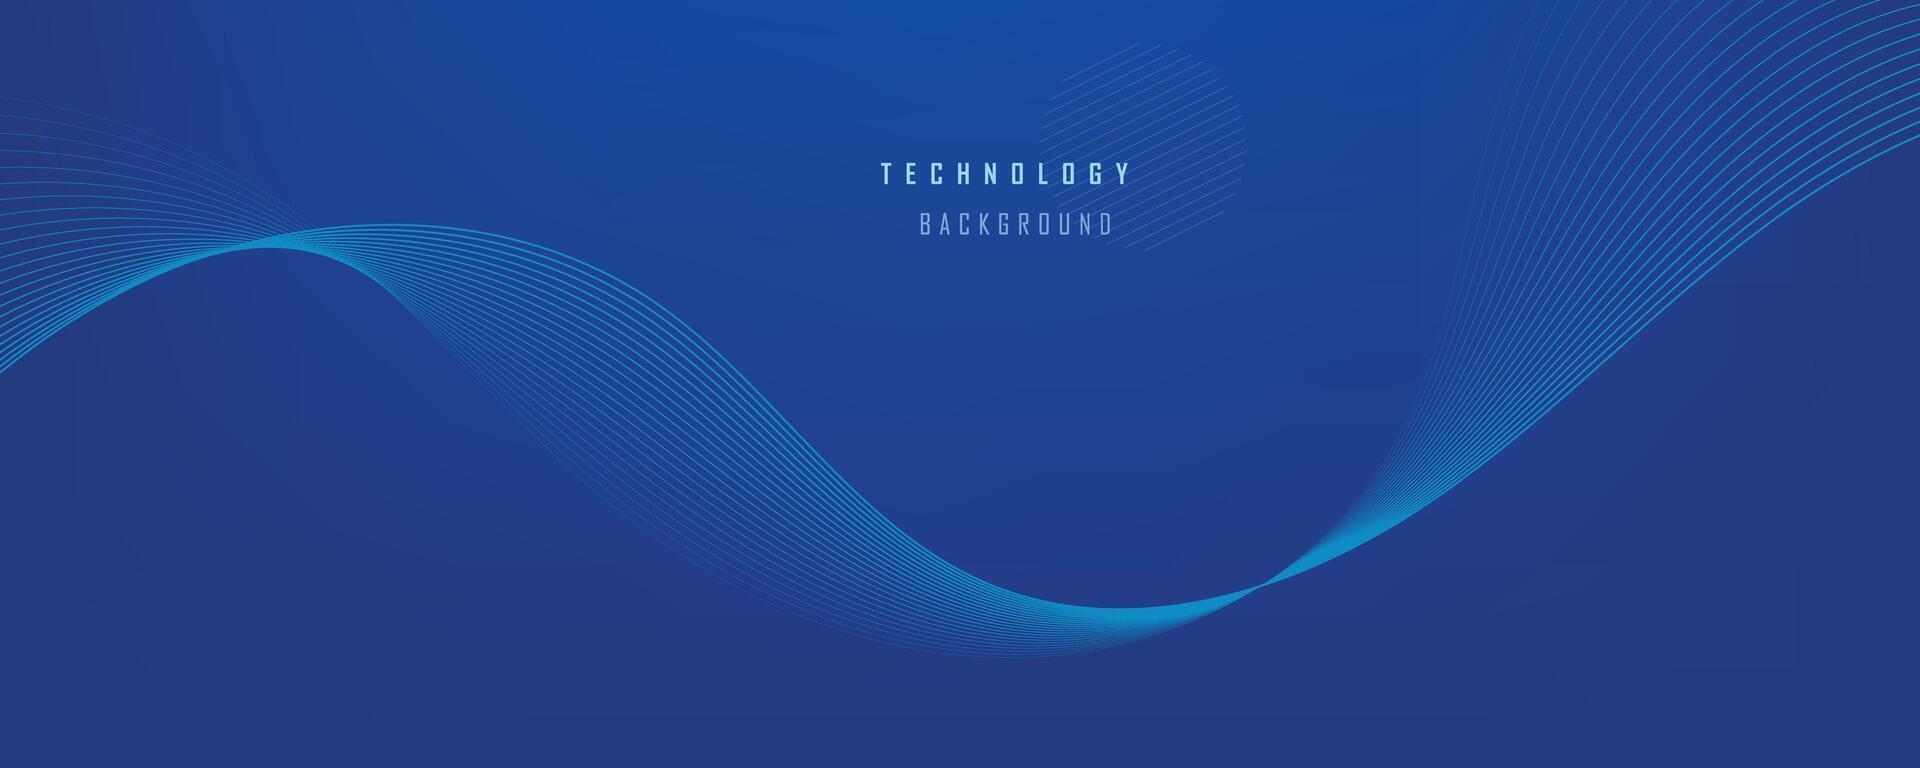 abstract vector blauw technologie achtergrond. eps10